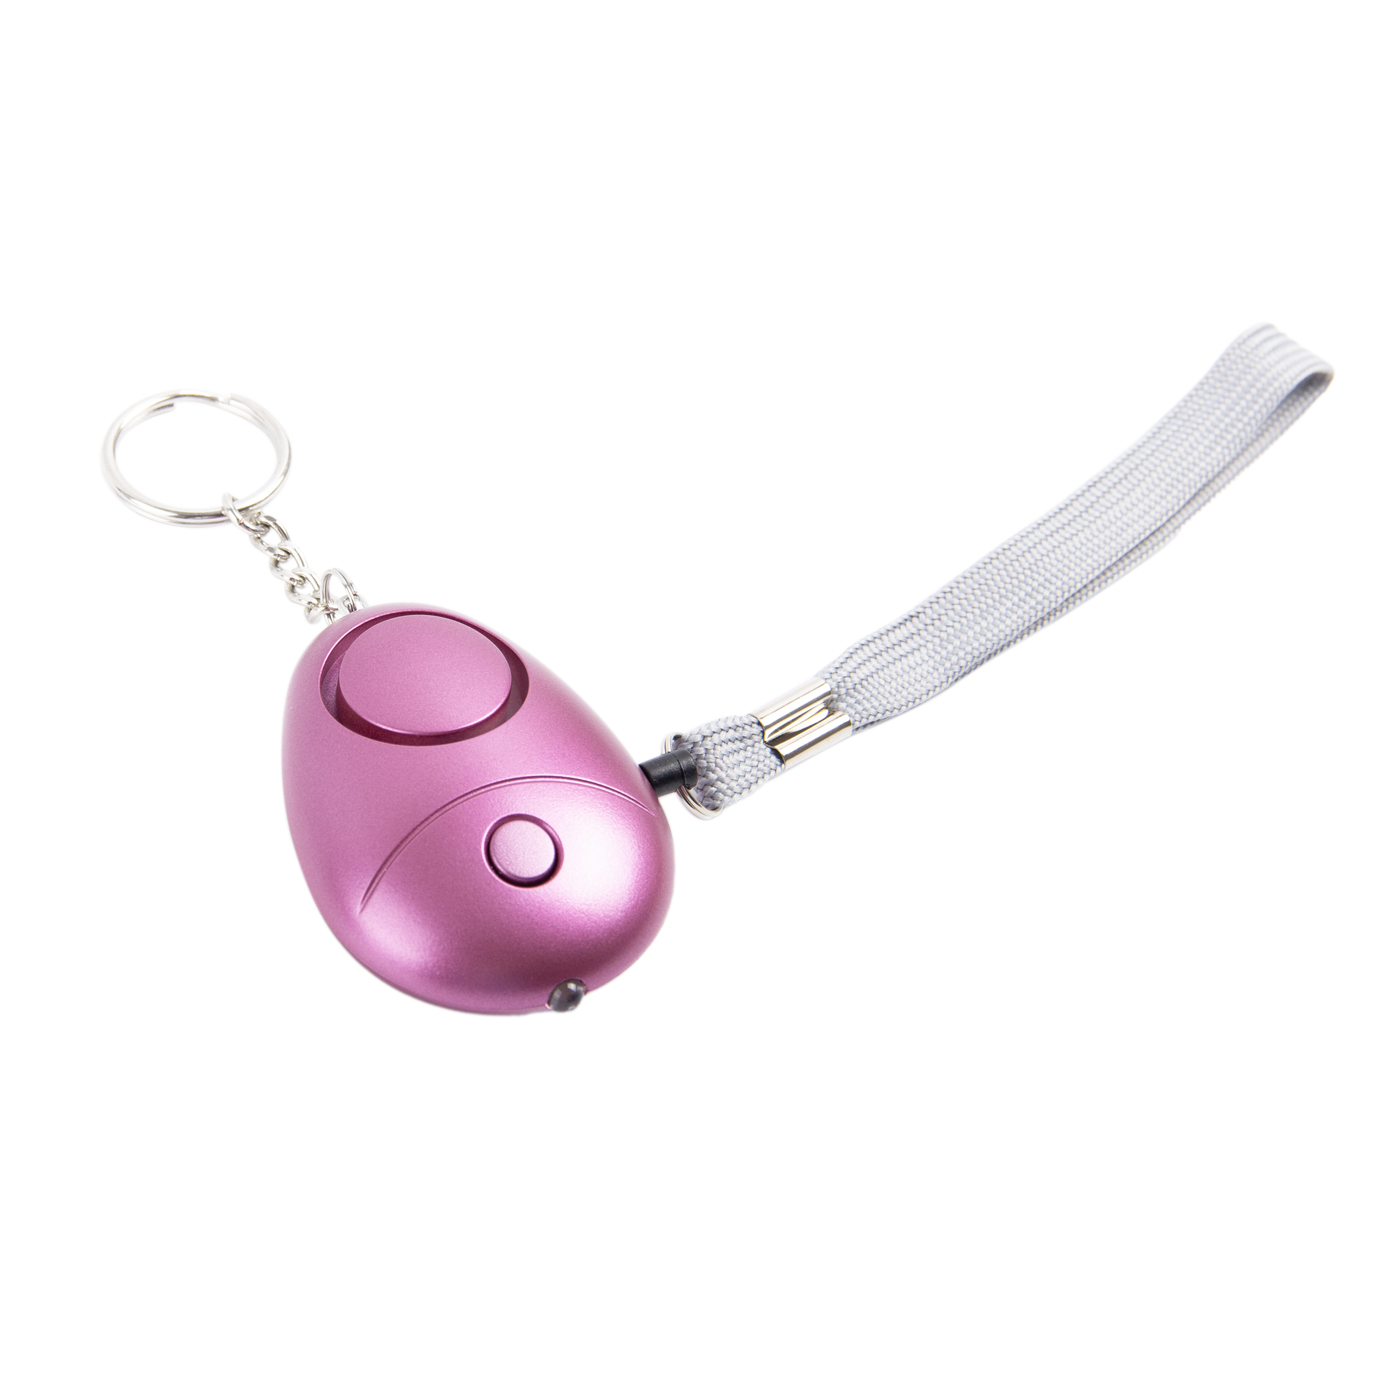 Personal Security Alarm Keychain With LED Light2